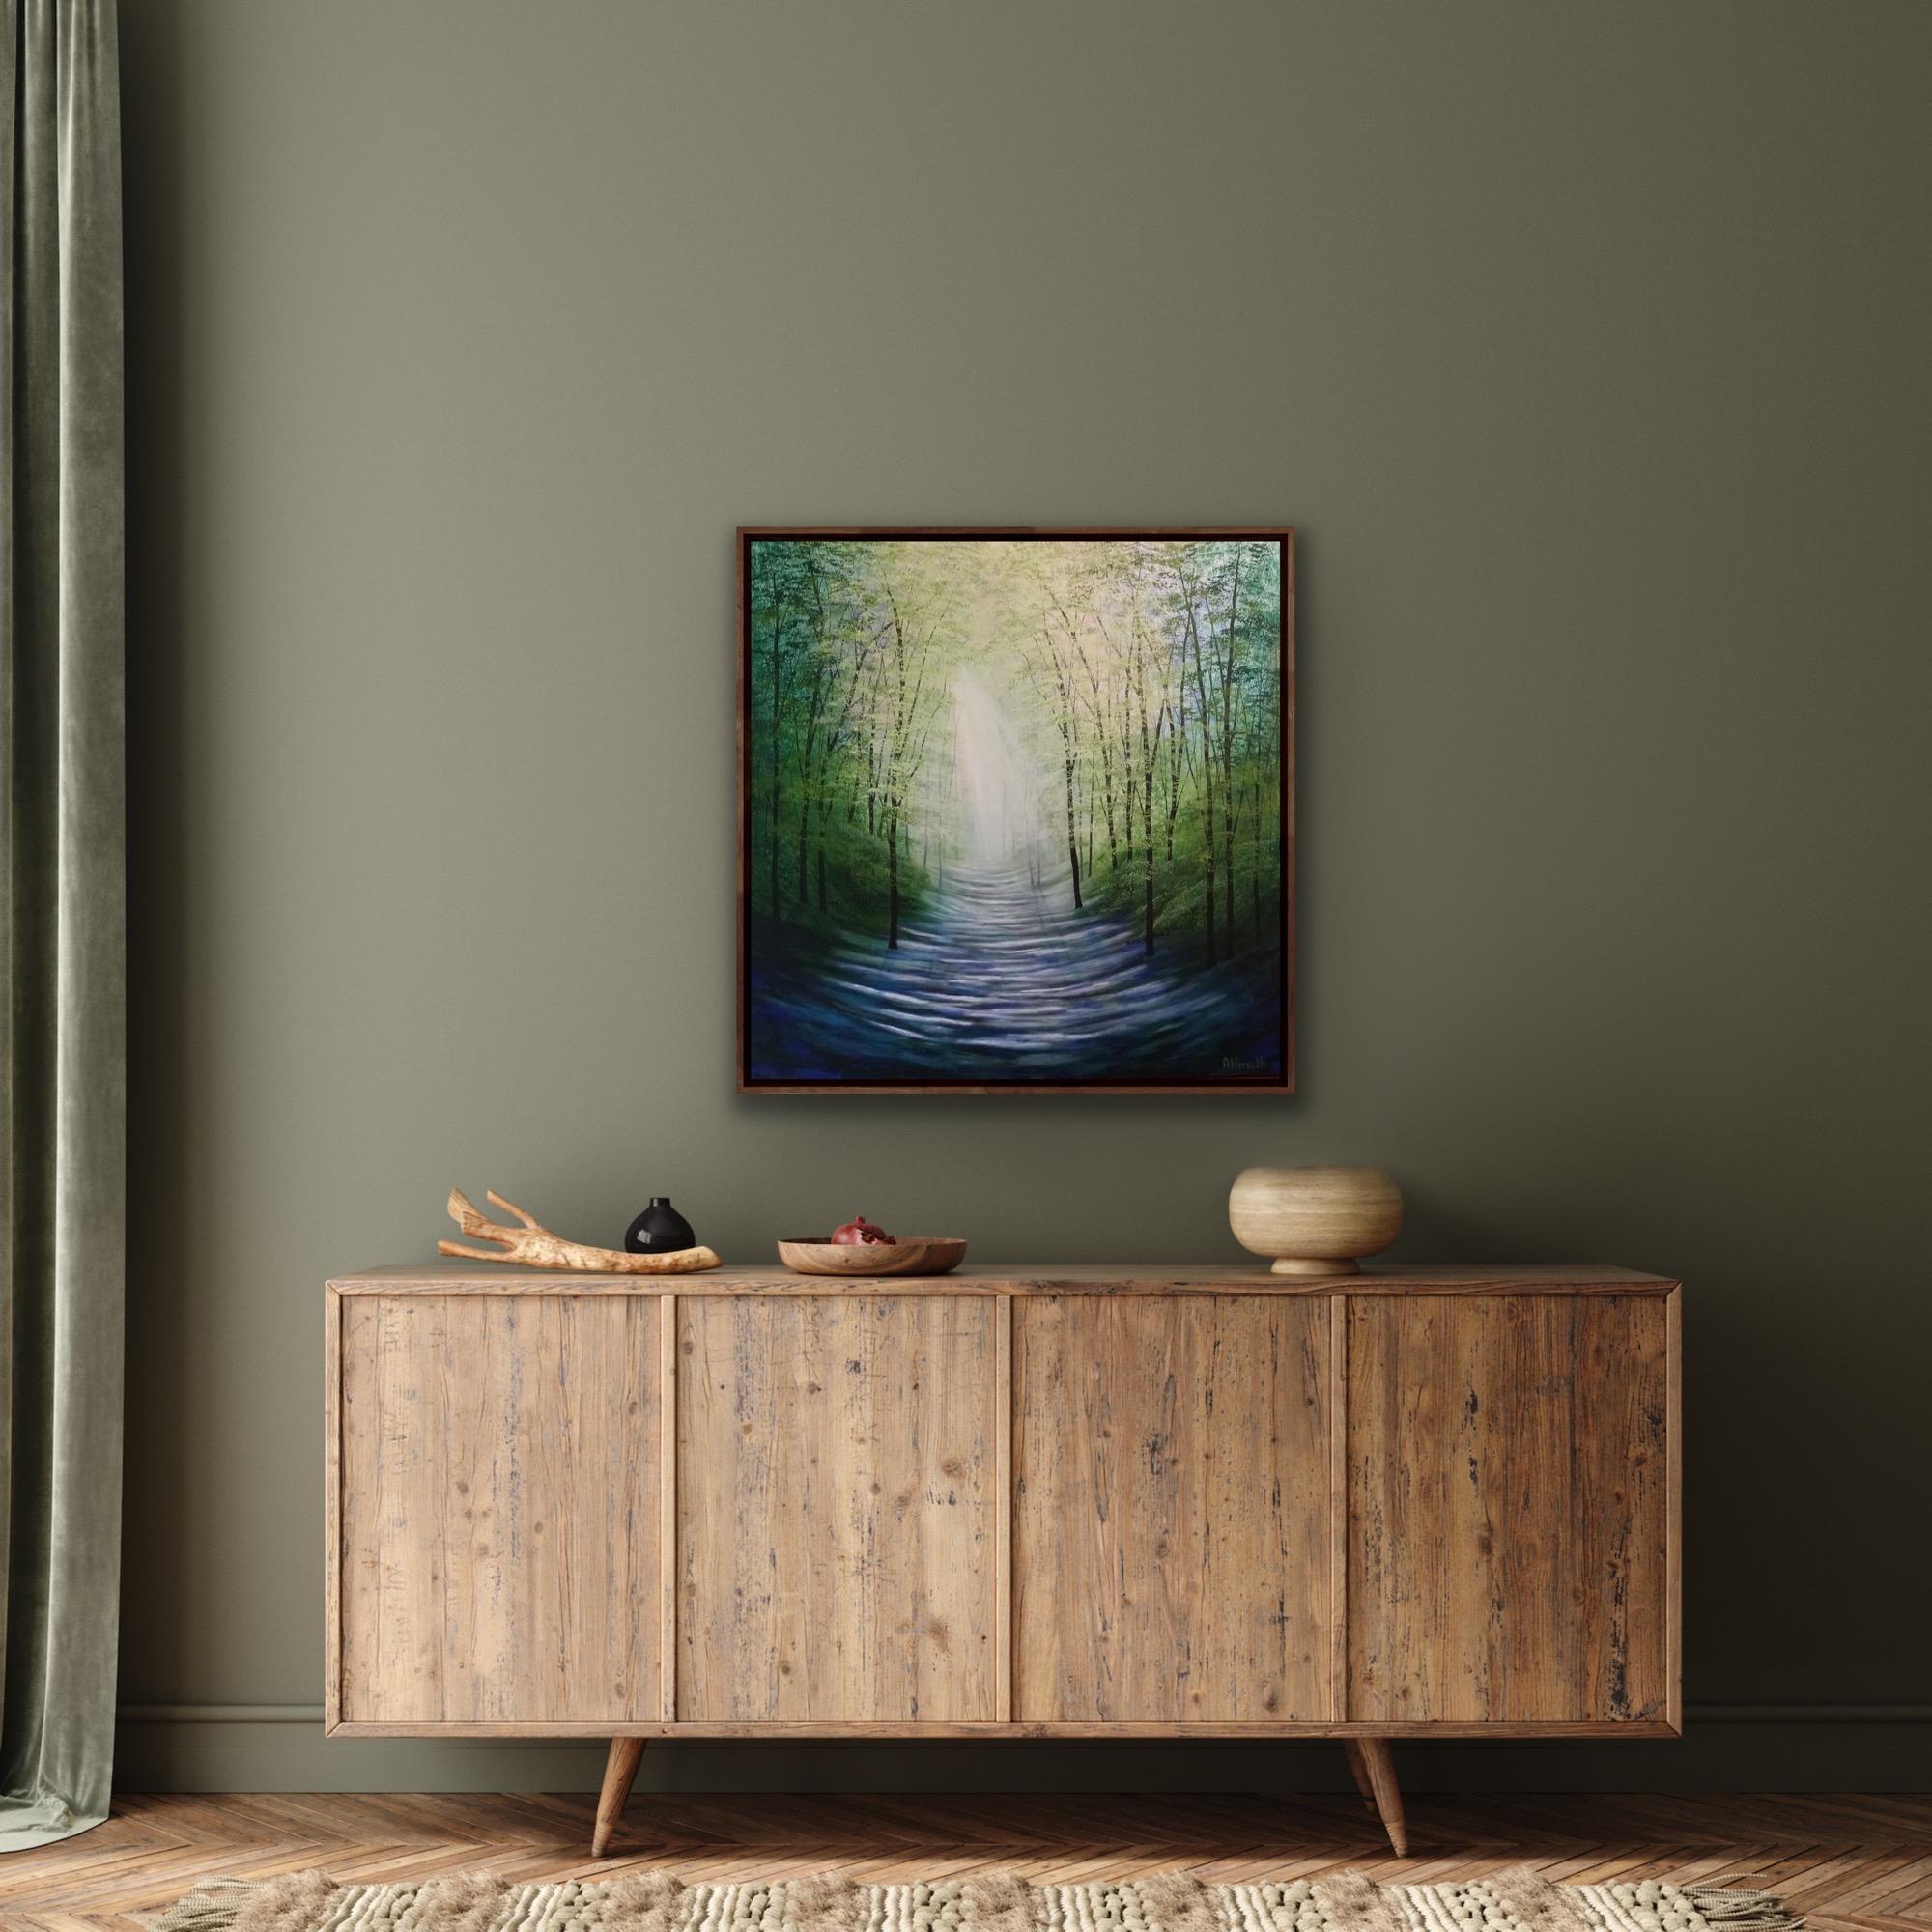 Timeless Tranquility By Amanda Horvath [2020]
Signed by the artist
Acrylics on canvas
Image size: H:90 cm x W:90 cm x D:3.5cm
Please note that insitu images are purely an indication of how a piece may look
Timeless Tranquility takes you walking